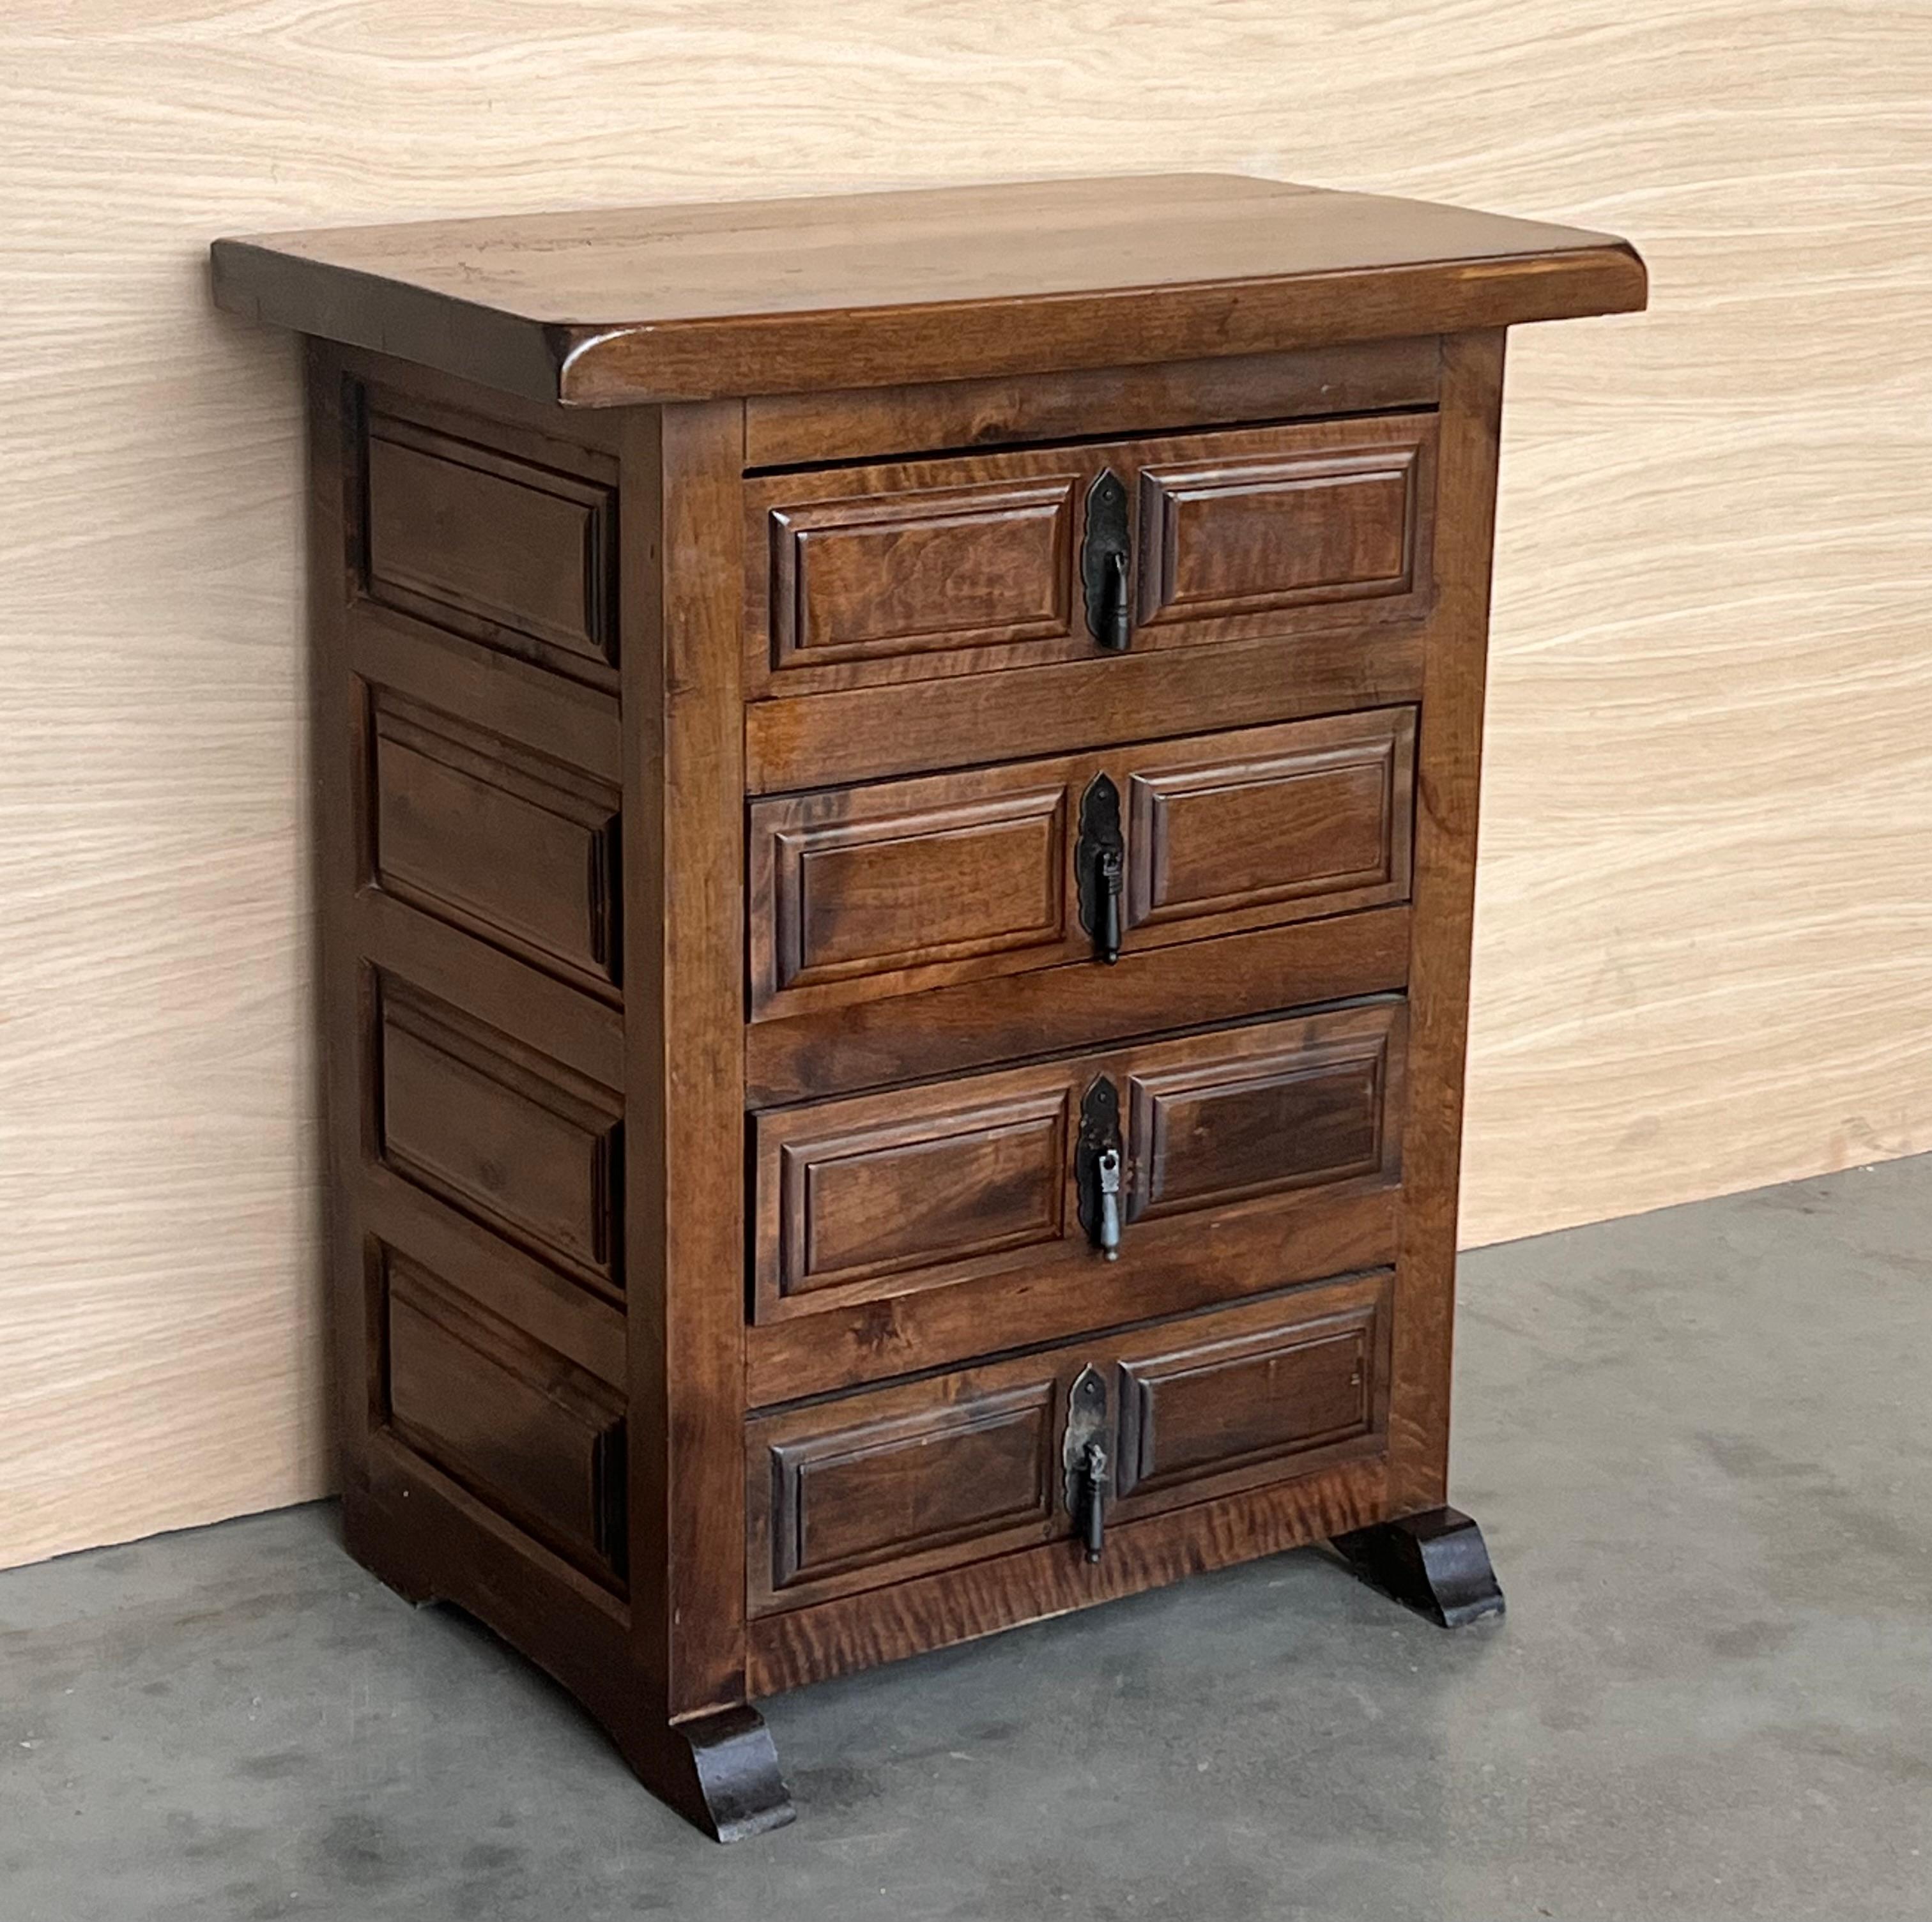 20th Century 20th Catalan Spanish Baroque Carved Walnut Tuscan Chest of Drawers or Nightstand For Sale